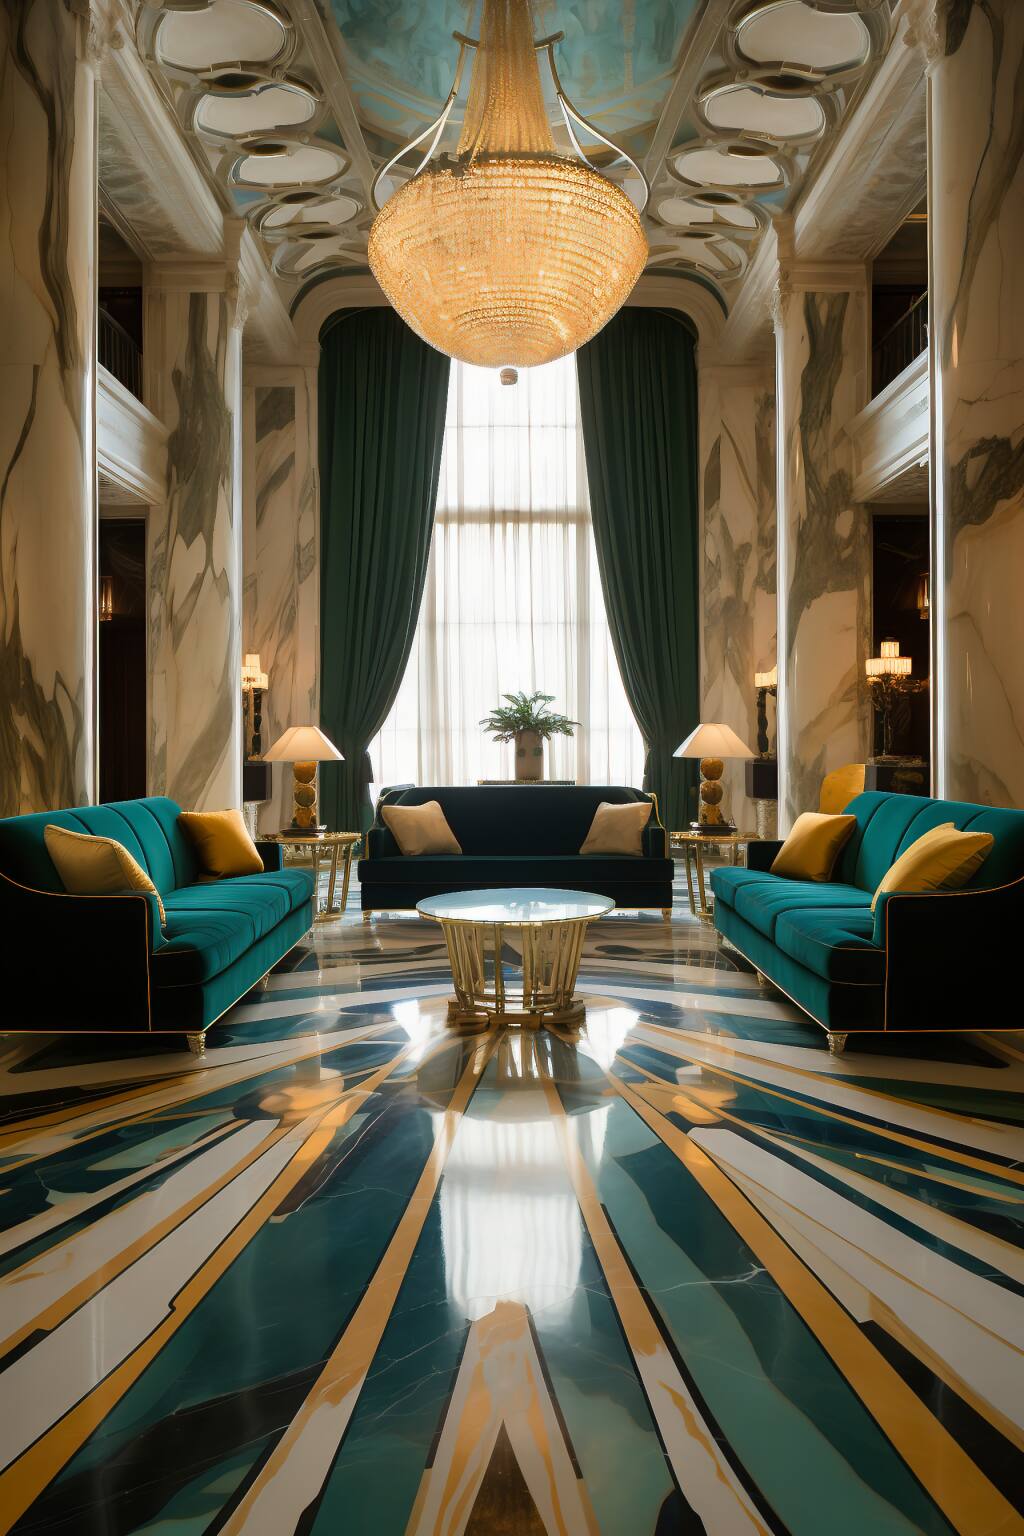 An Emerald And Gold Luxury Marble Living Room With Plush Green Sofas, A Gold Trim Coffee Table, And White And Gold Accent Chairs, Set Against A Marble Floor With Gold Inlays For A Rich, Elegant Ambiance.